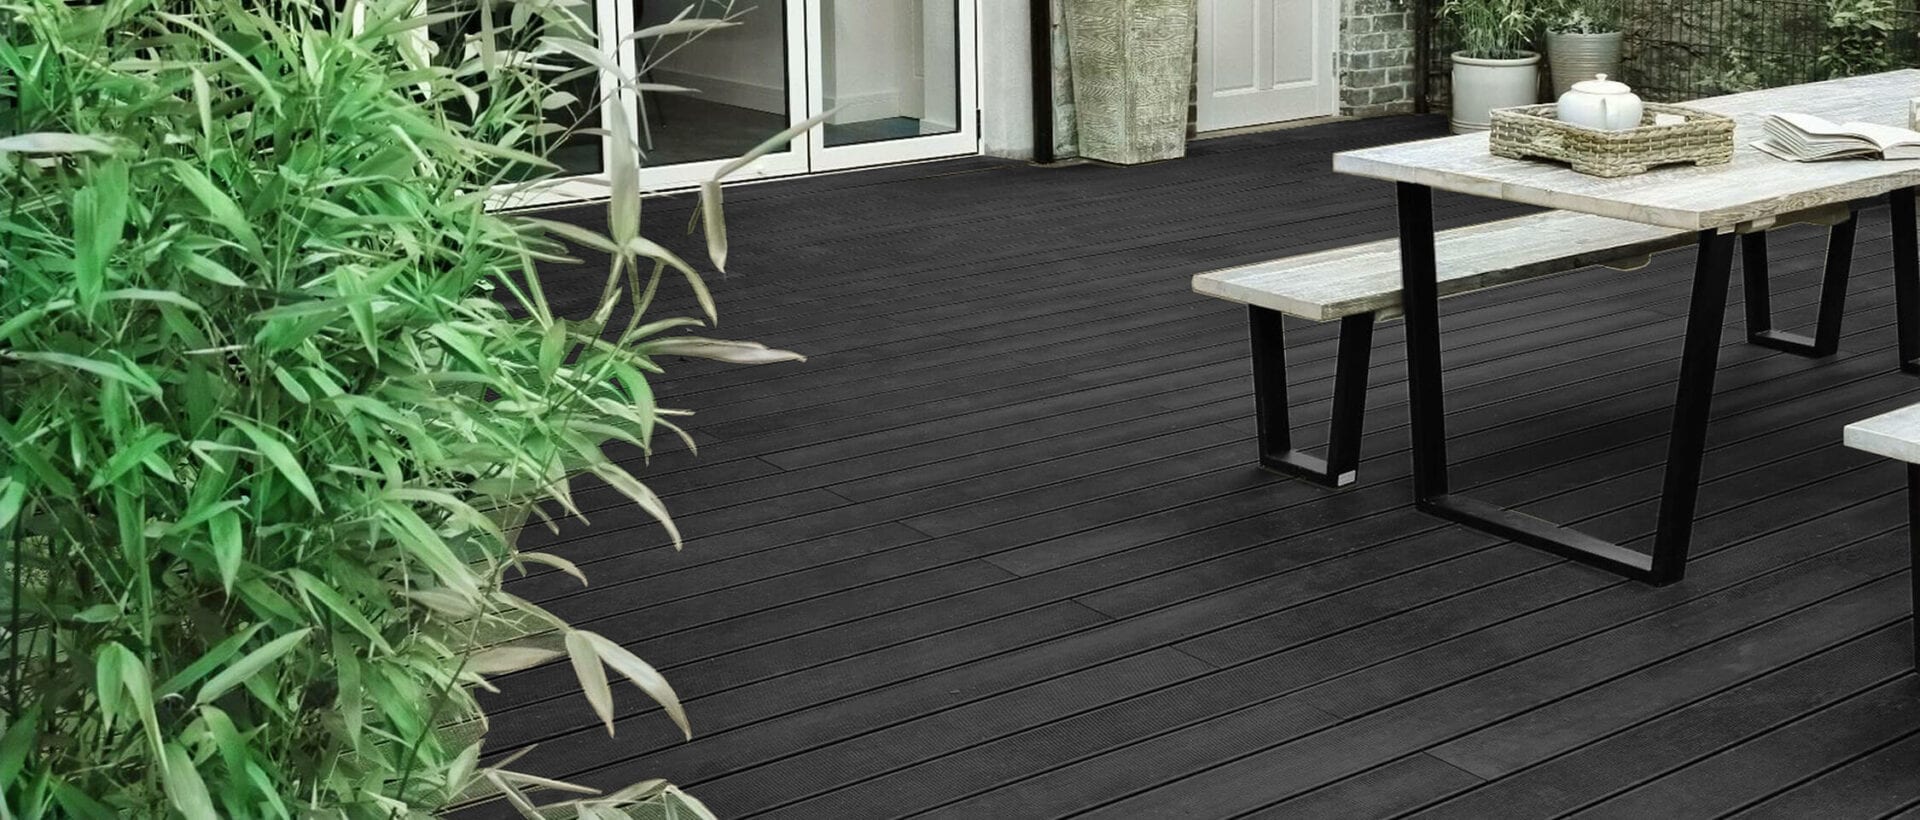 Is composite decking slippery?